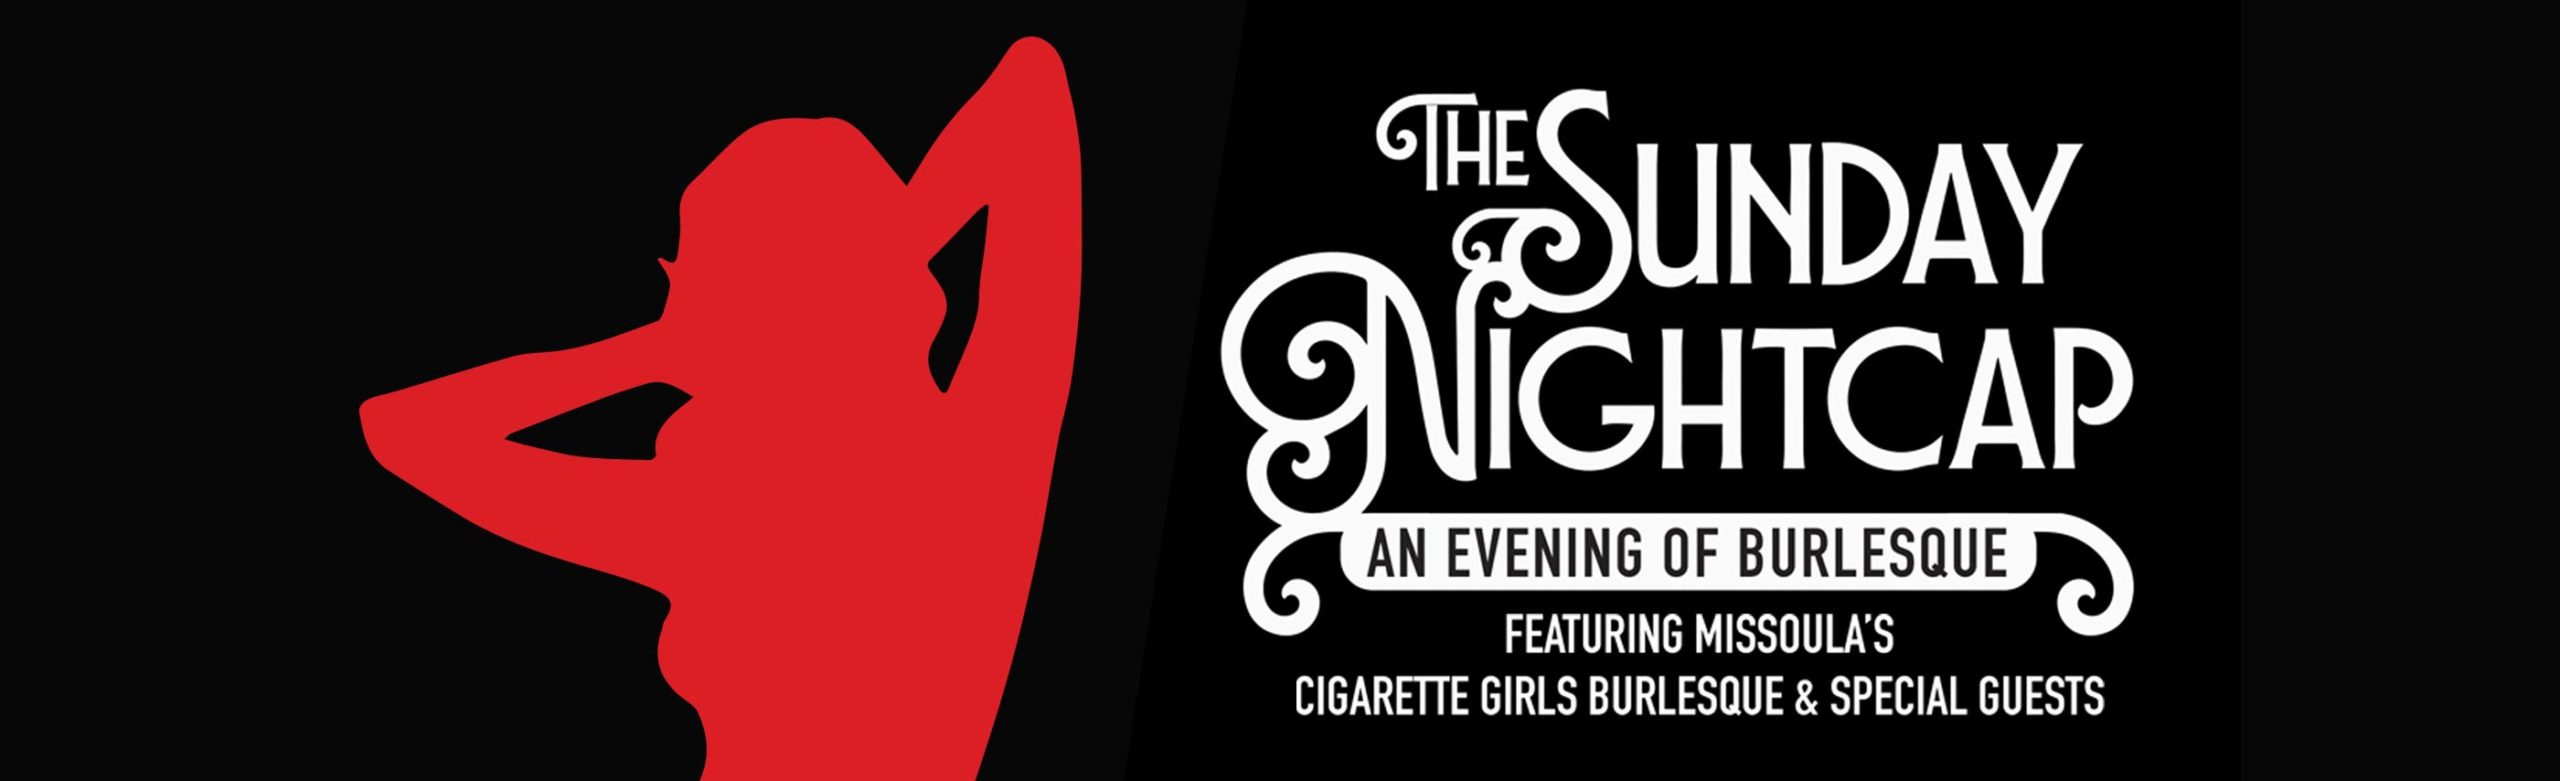 Event Info: The Sunday Nightcap at the Top Hat Image